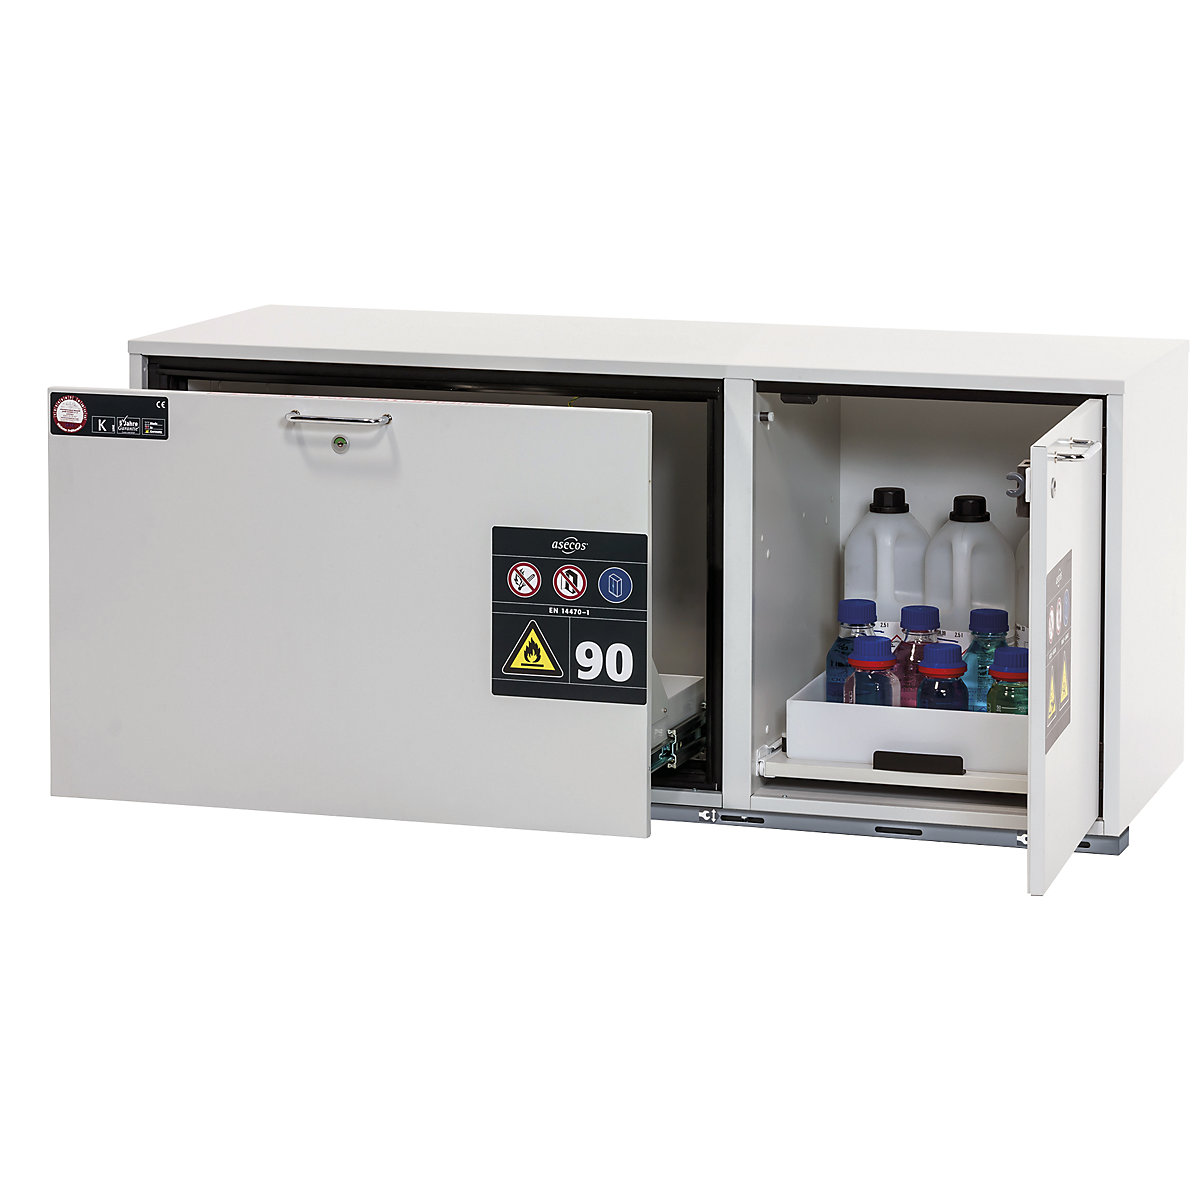 Type 90 fire resistant combination add-on drawer unit - asecos